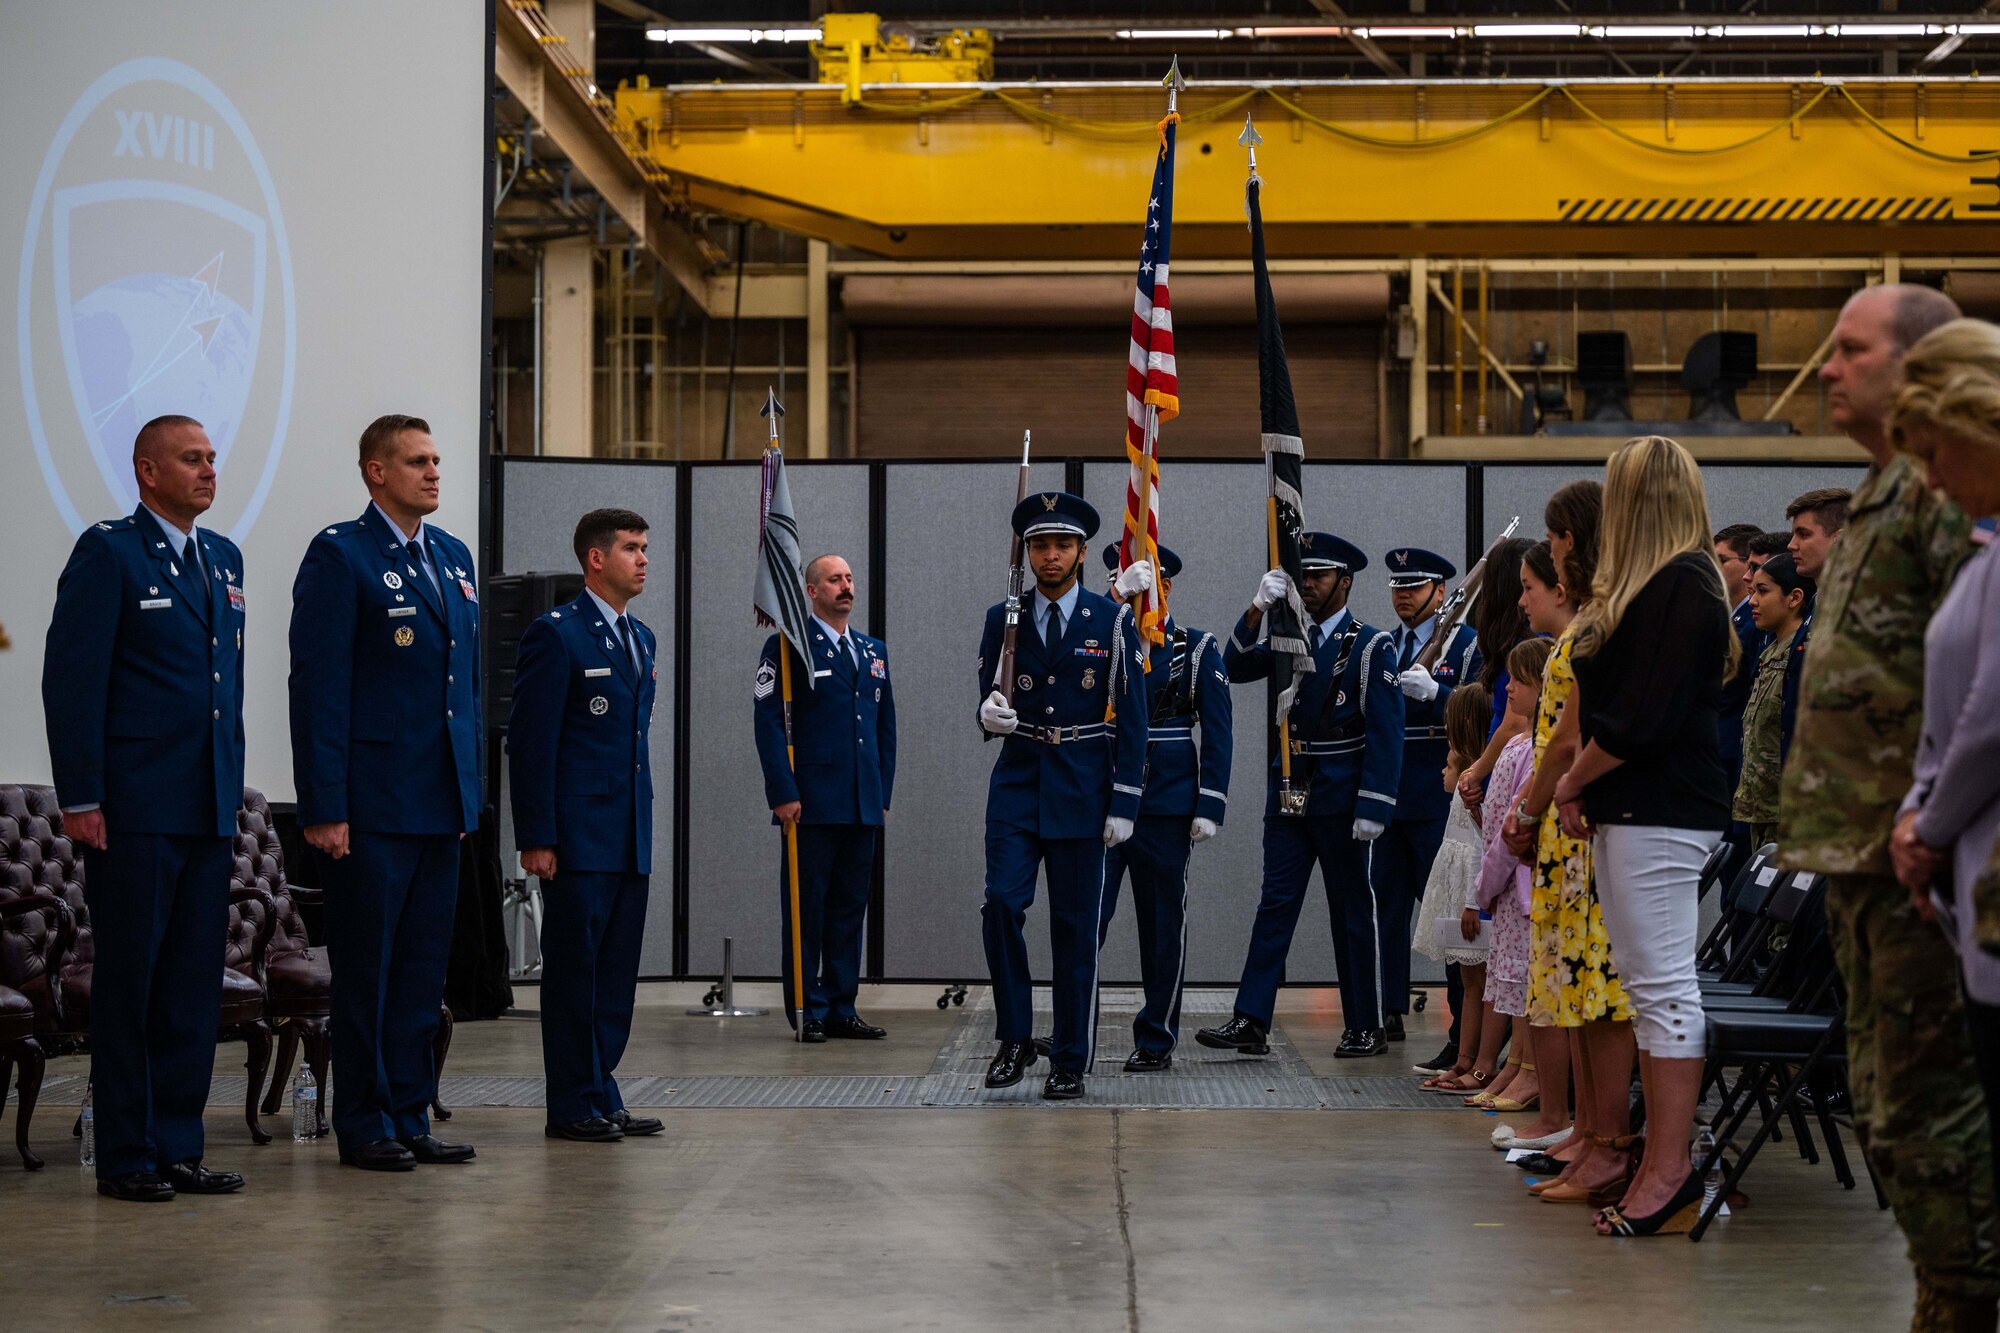 The Vandenberg Base Honor Guard Team presents the colors during the 18th Space Defense Squadron’s (18 SDS) Change of Command ceremony at Vandenberg Space Force Base, Calif., June 21, 2023. U.S. Space Force Col. Marc A. Brock, Space Delta 2 commander, acted as the presiding officer who relinquished command from outgoing commander Lt. Col. Matthew J. Lintkerover to incoming commander Lt. Col. Jordan O.E. Mugg. (U.S. Space Force photo by Tech. Sgt. Luke Kitterman)